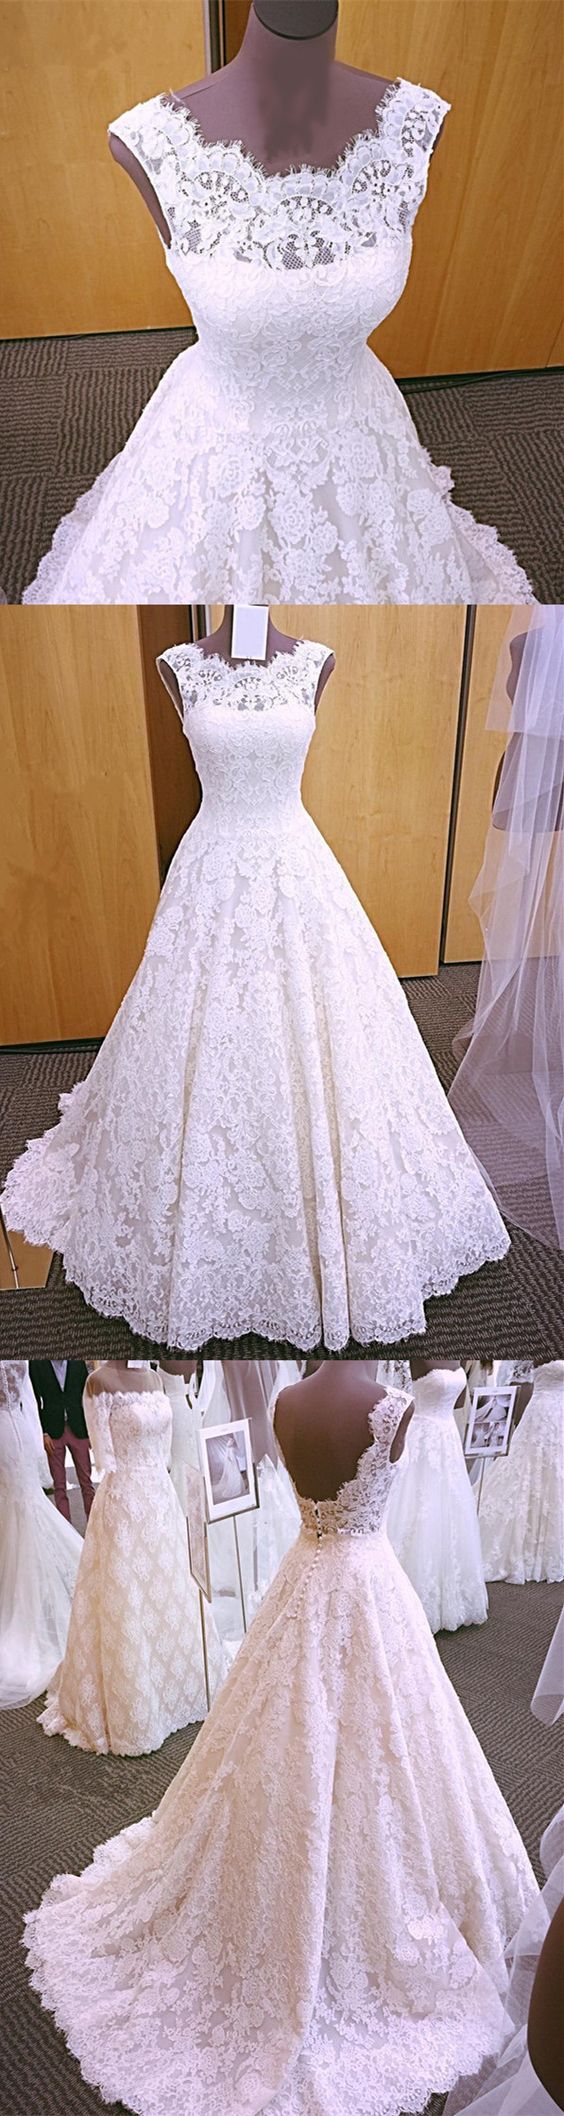 Vintage Cap Sleeves Open Back Lace Wedding Dresses Puffy Long White Bridal Gowns Real Pictures